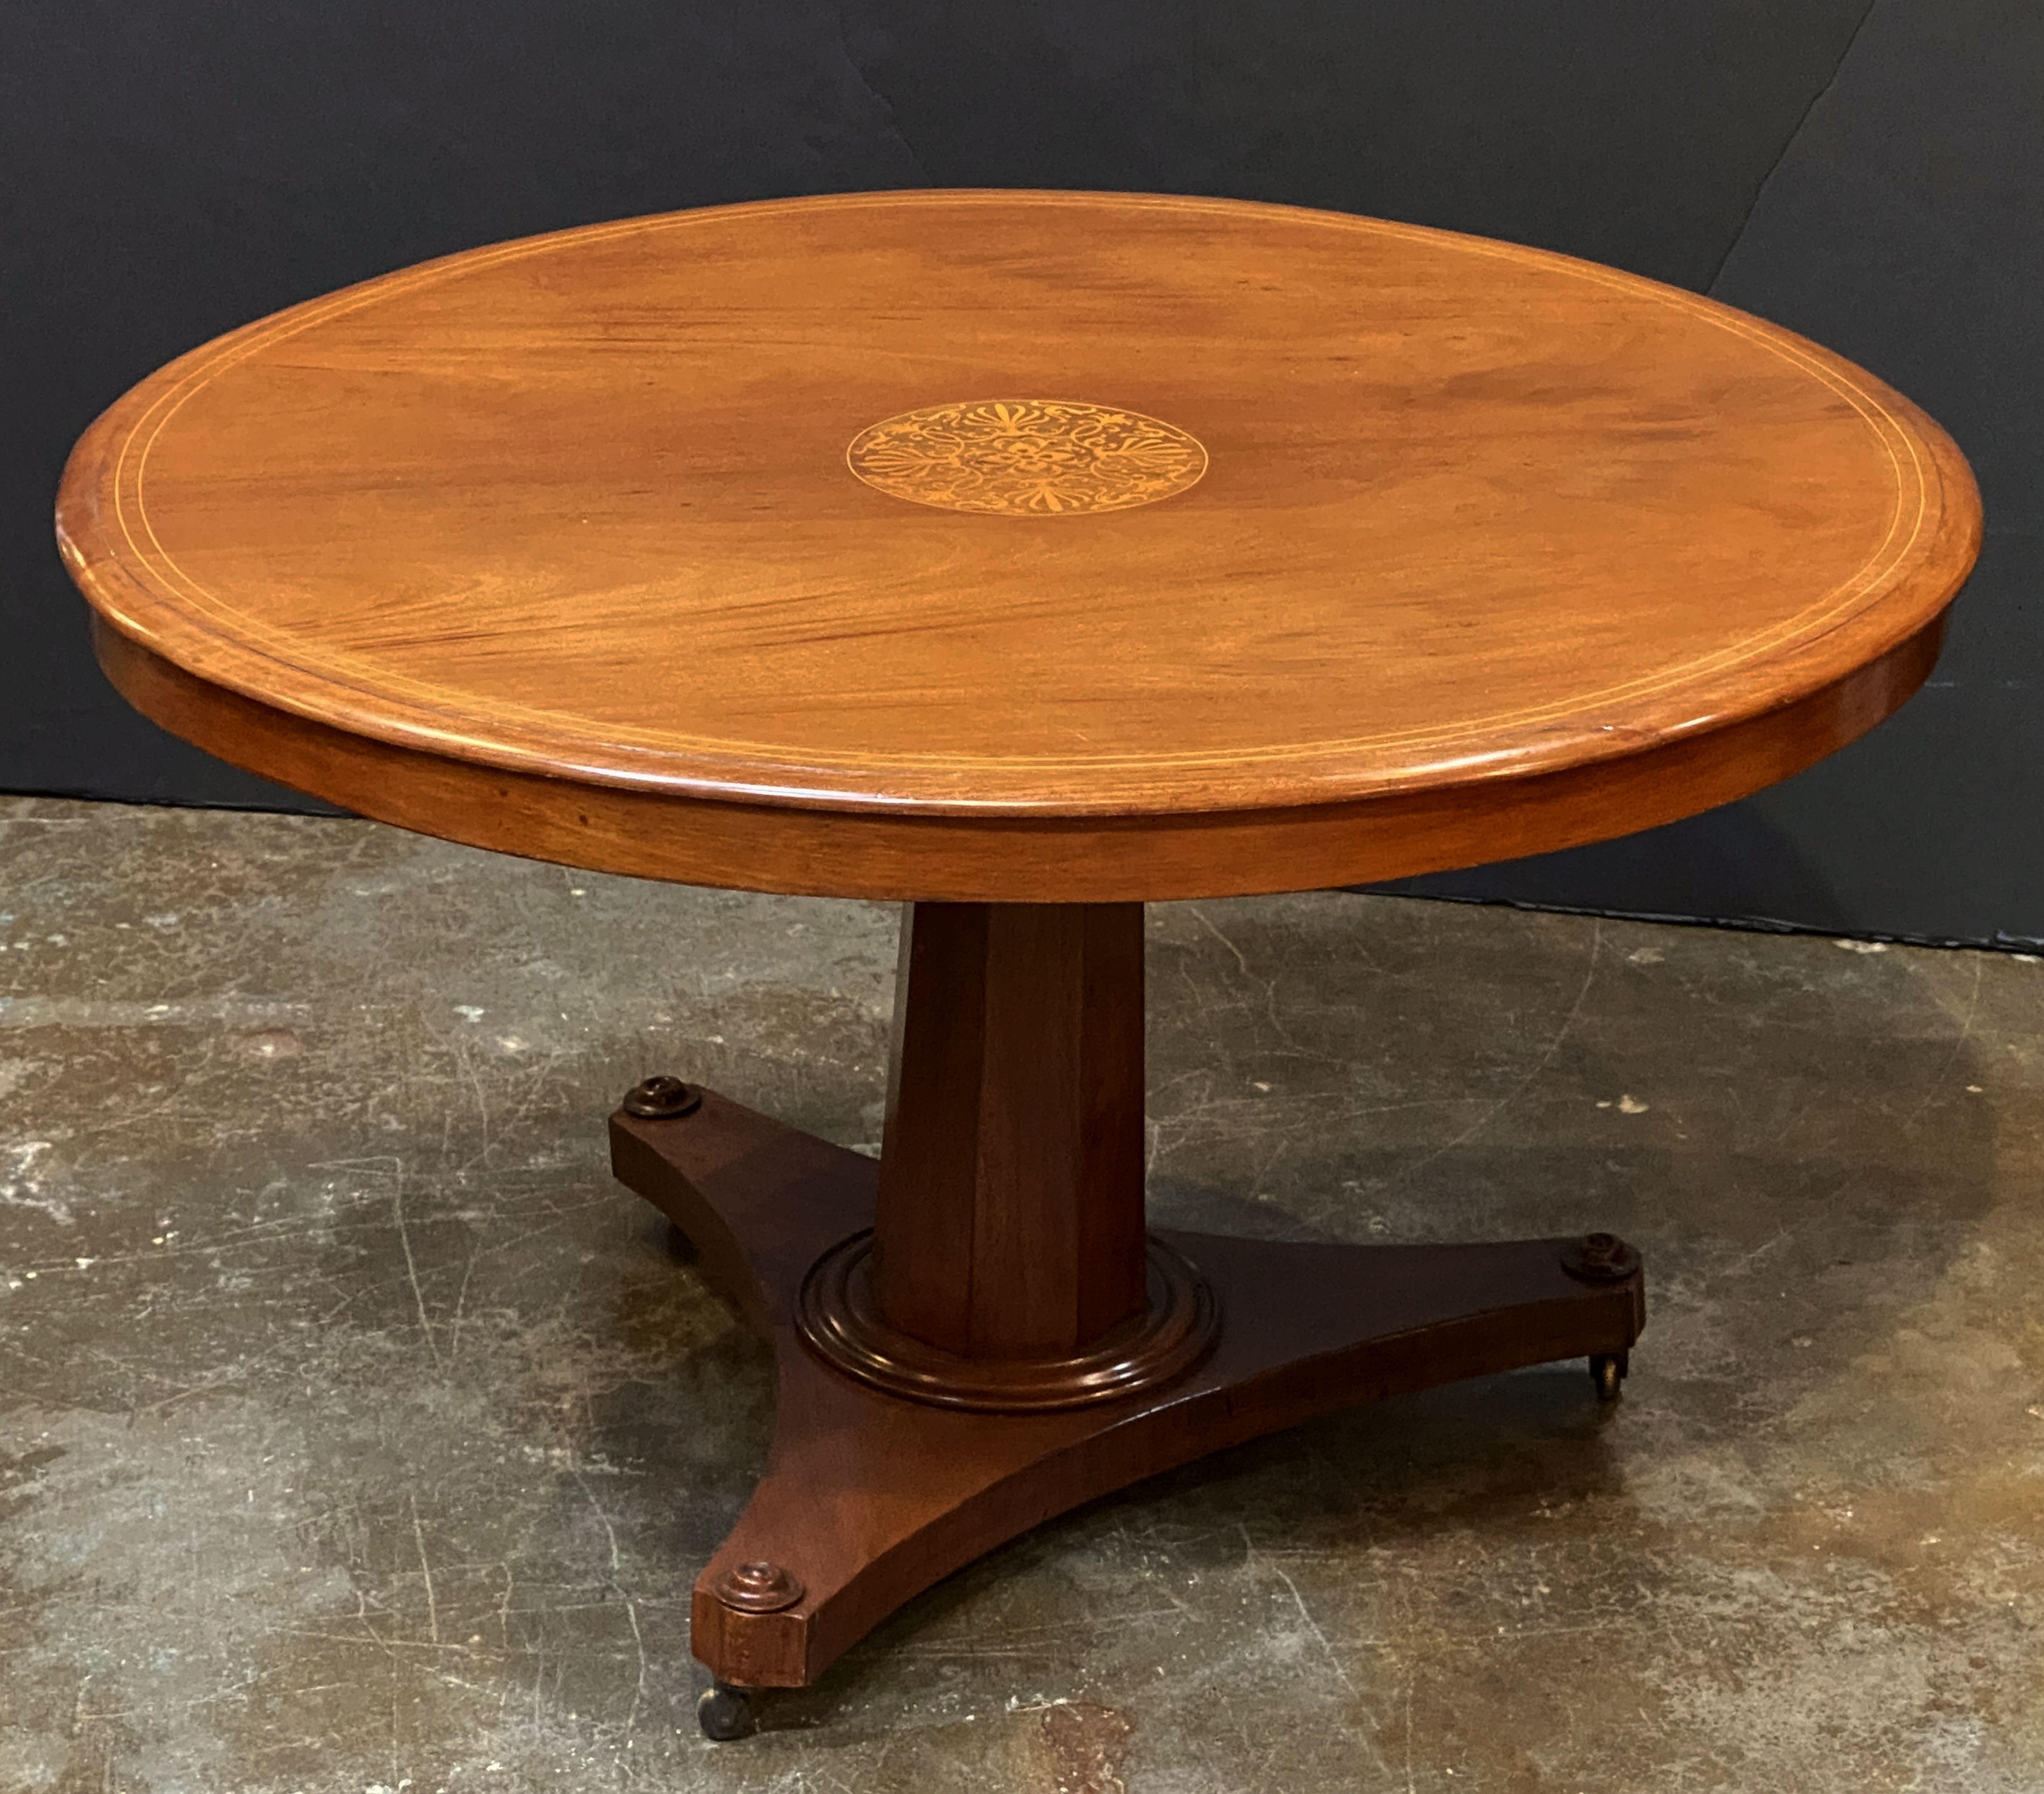 A fine English tilt-top center table from the 19th century, featuring a handsome round veneered top of mahogany, with an inlaid design of boxwood in the center. Set upon a tapering eight-sided pedestal and tripod base, and resting on rolling